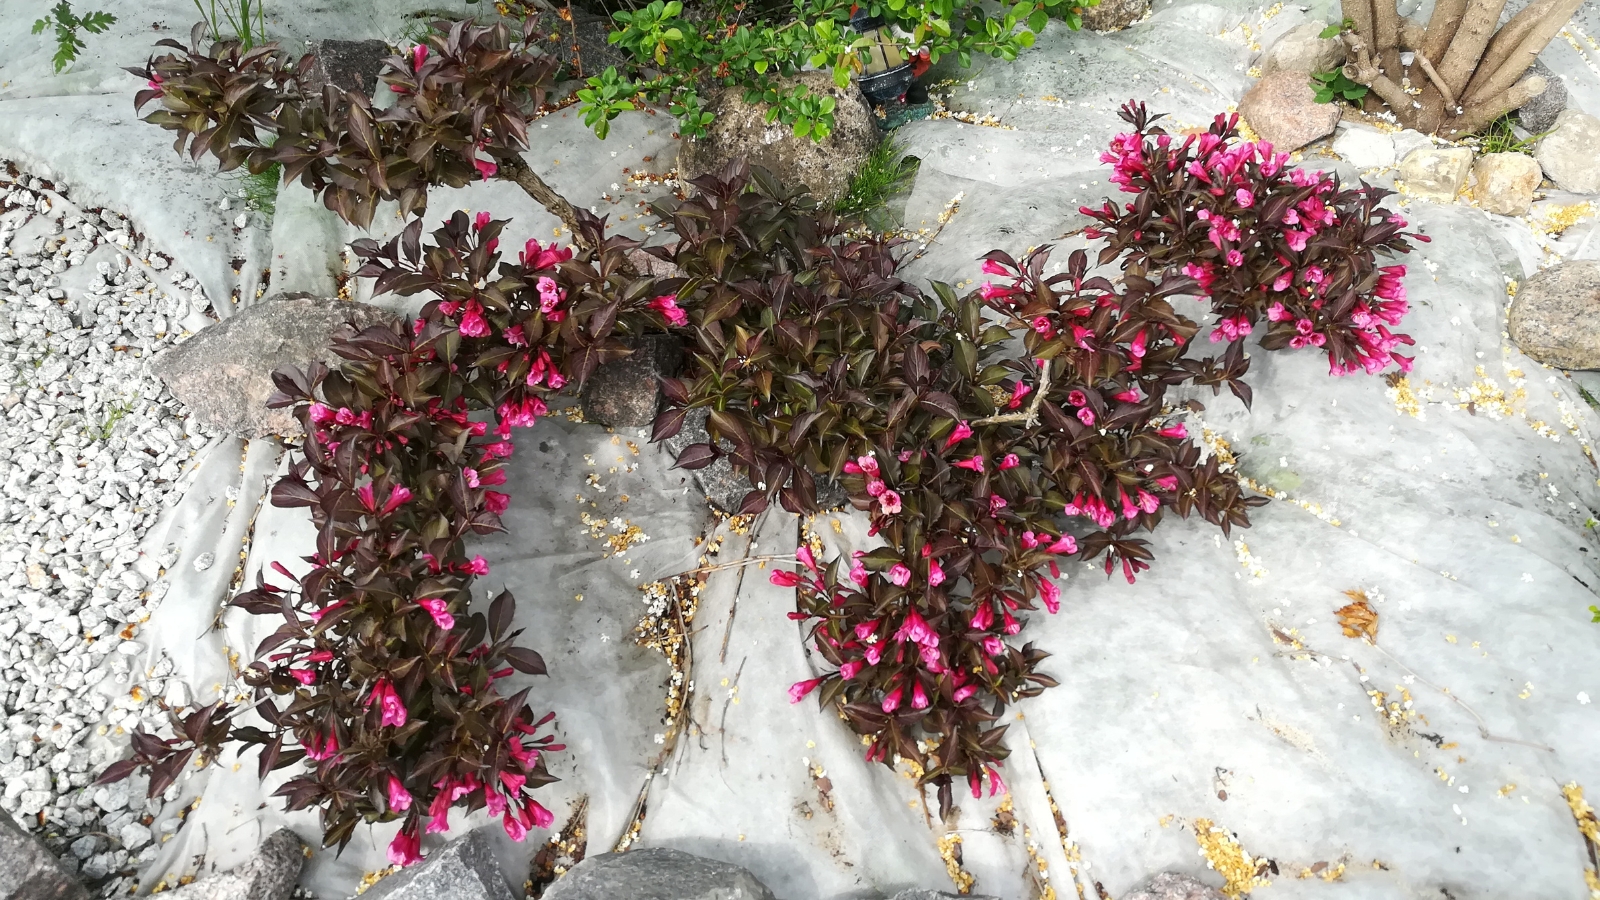  A 'Wine and Roses' weigela shrub displays pink flowers contrasting against brown leaves, set against a backdrop of white weed control fabric covering the ground.